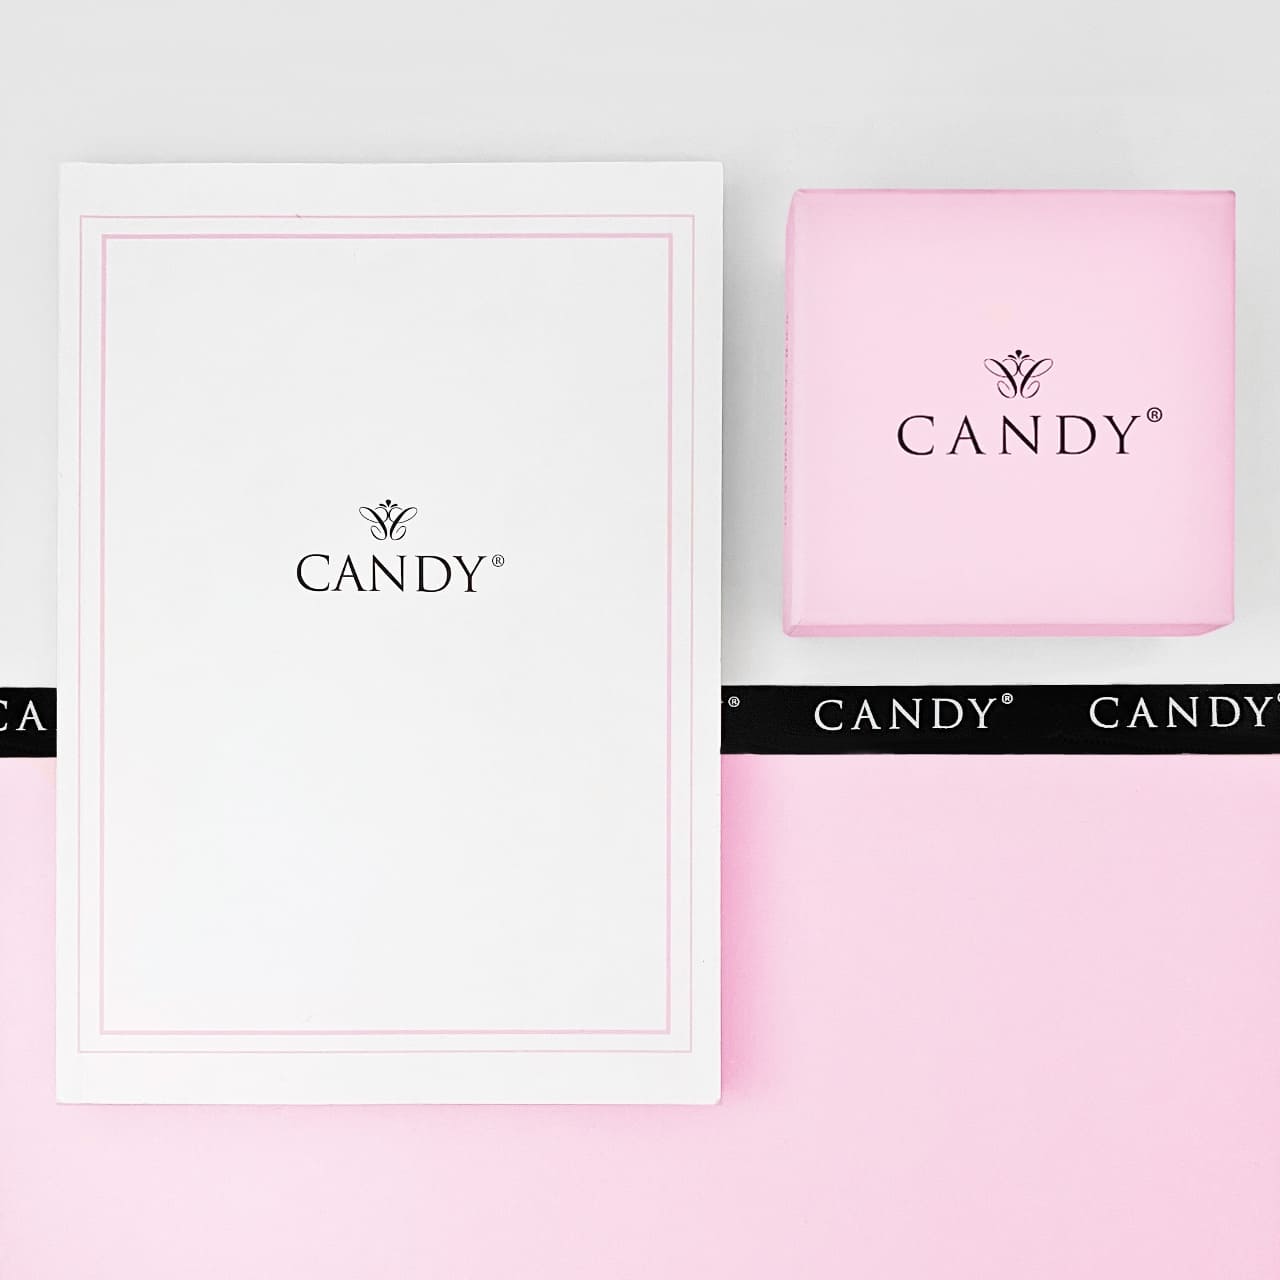 CANDY_verpackung_pink